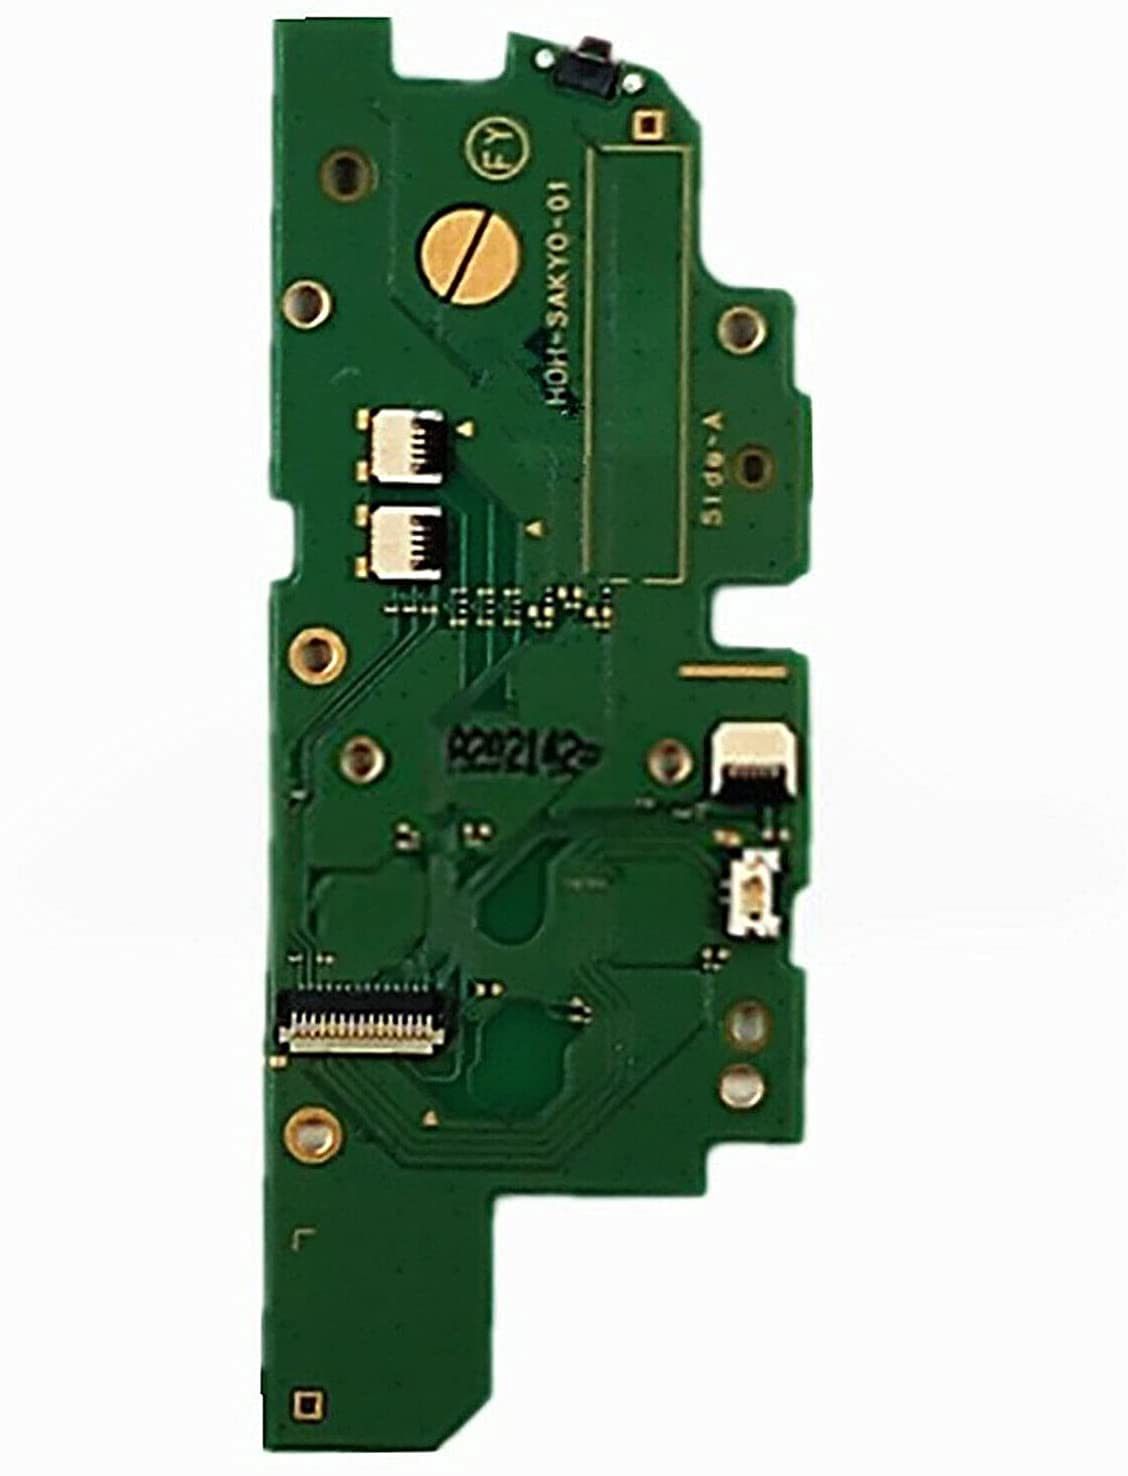 Replacement Left L Side Joycon Button Board PCB Motherboard D Pad Board HDH-SAKYO-01 for Switch Lite NS Lite Game Console